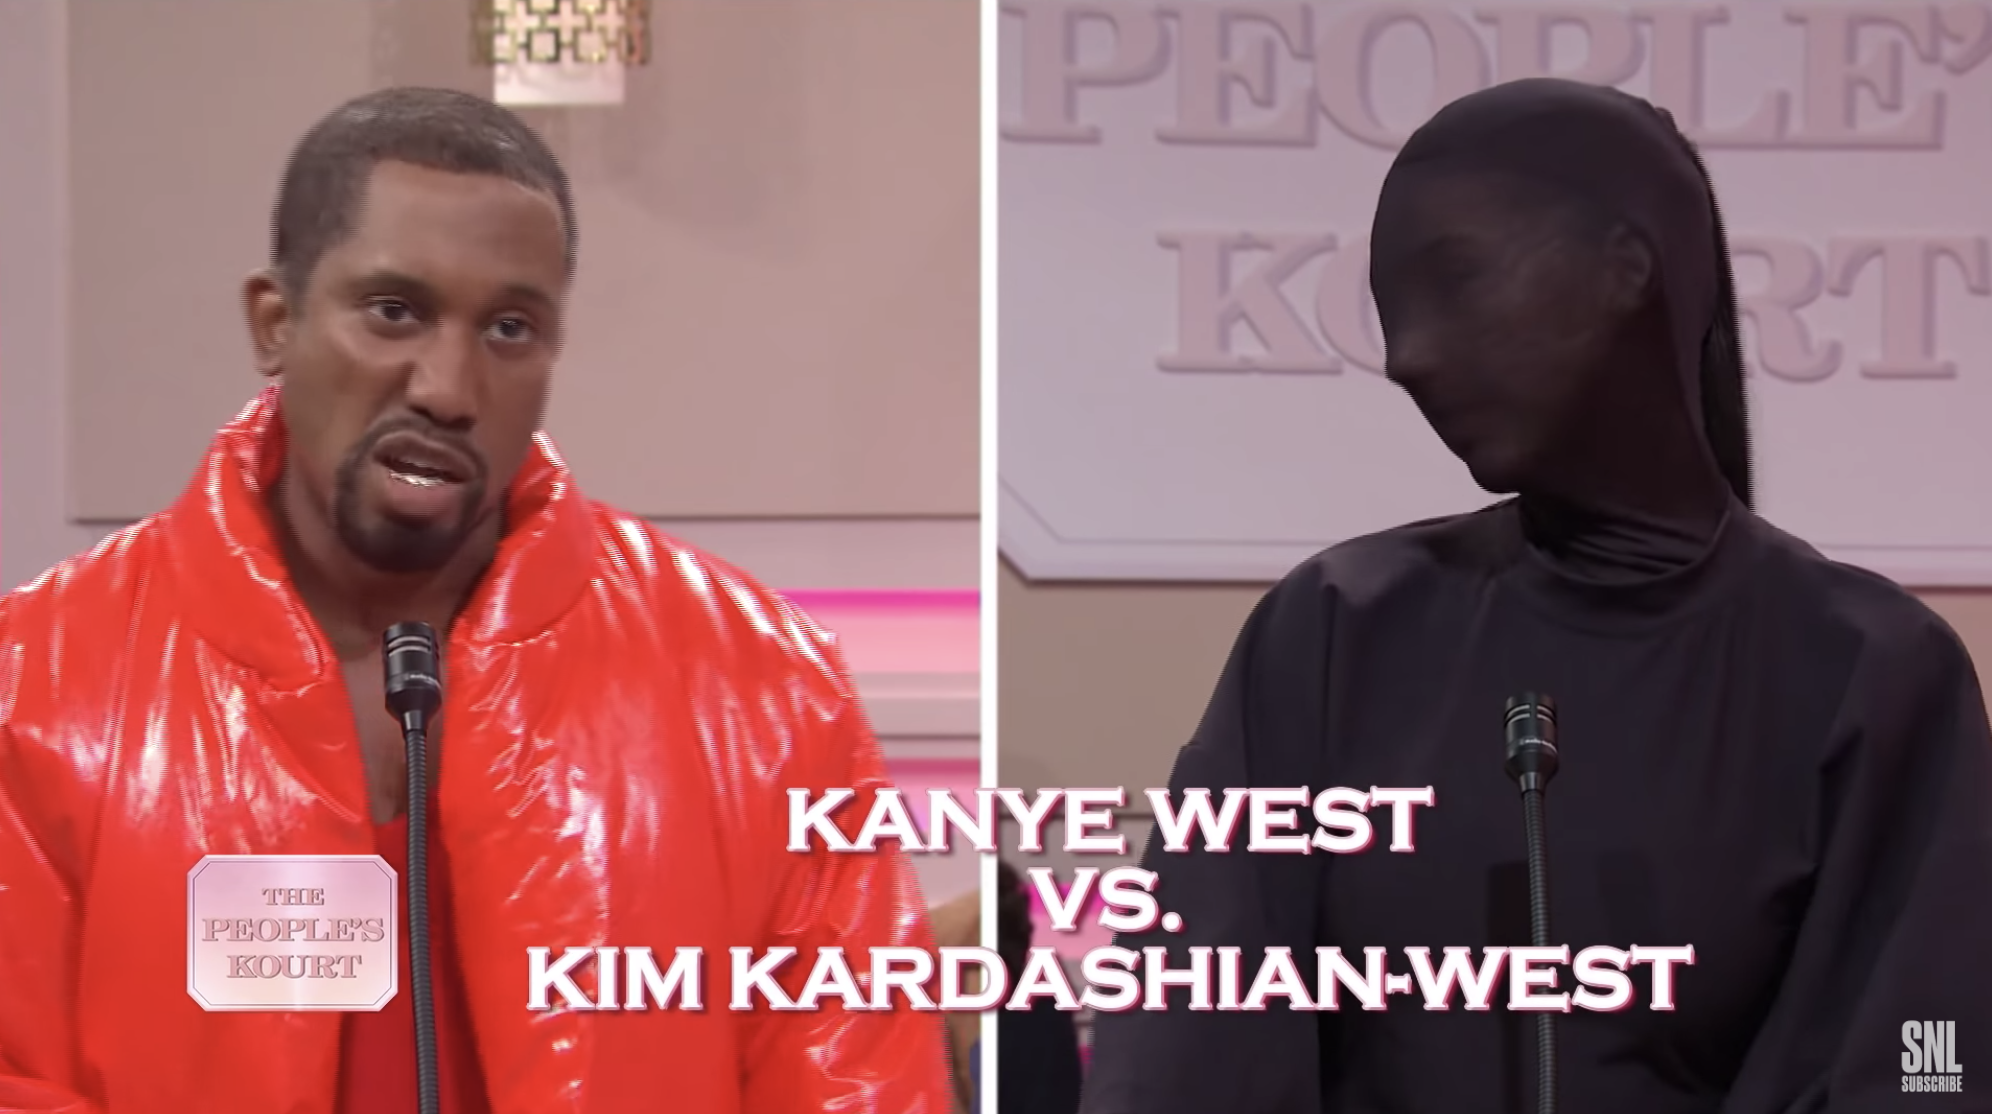 Kanye speaks while wearing a puffer jacket